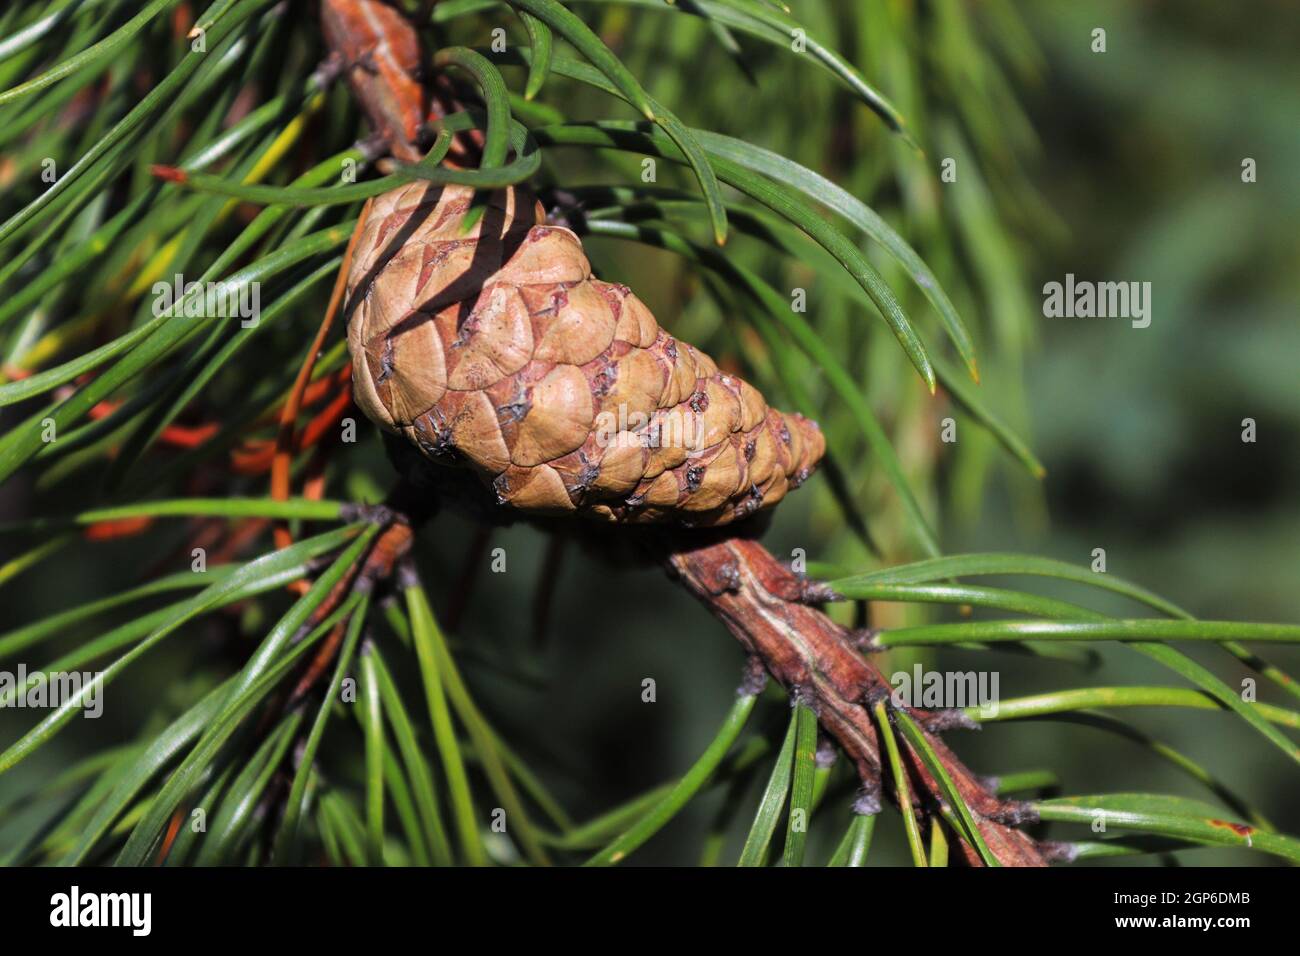 An older but closed pine cone on a branch. Stock Photo